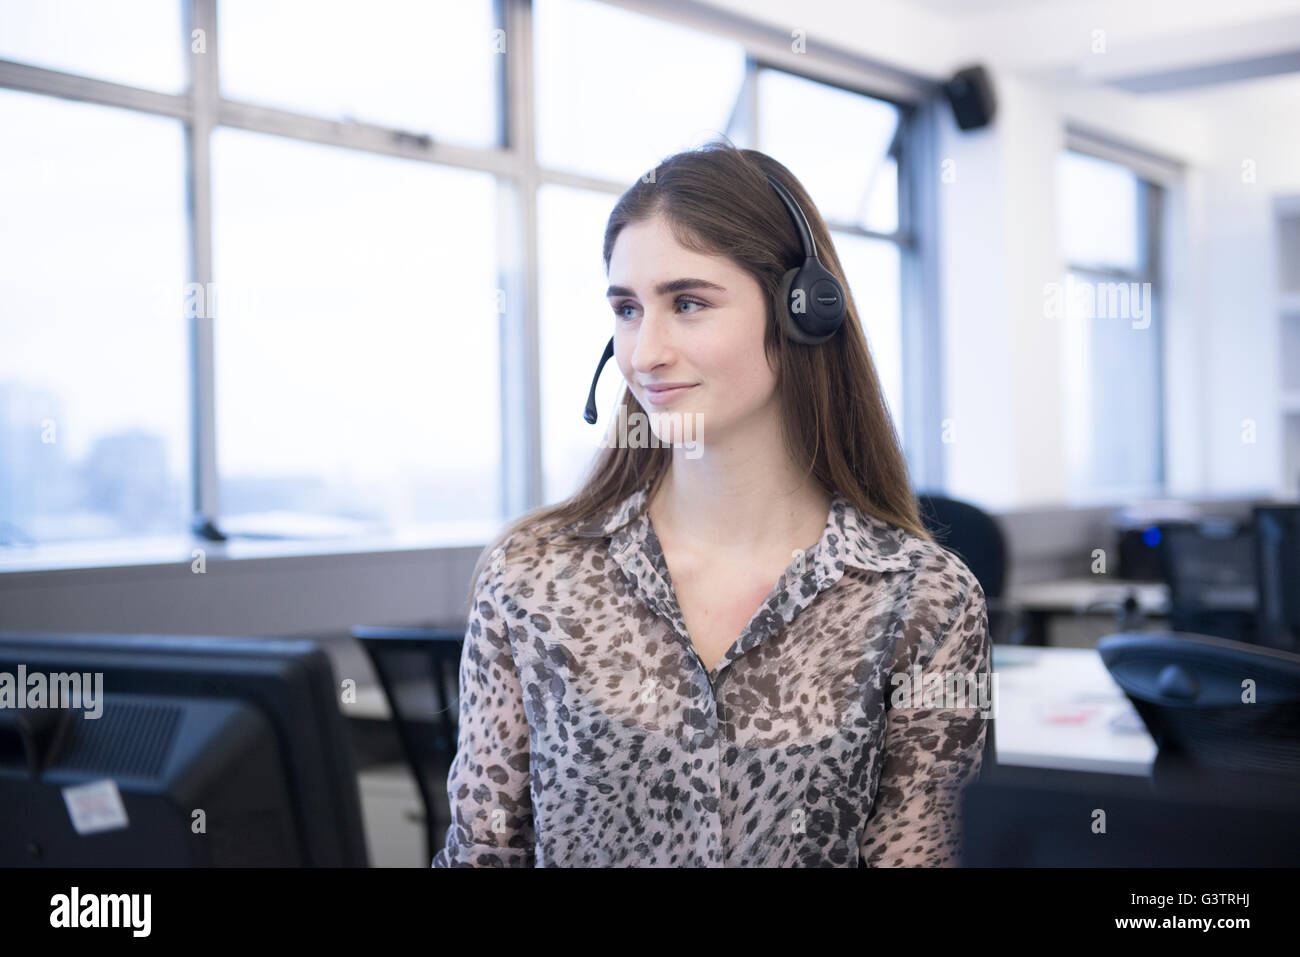 A young professional woman receiving a phone call on a headset in an office environment. Stock Photo